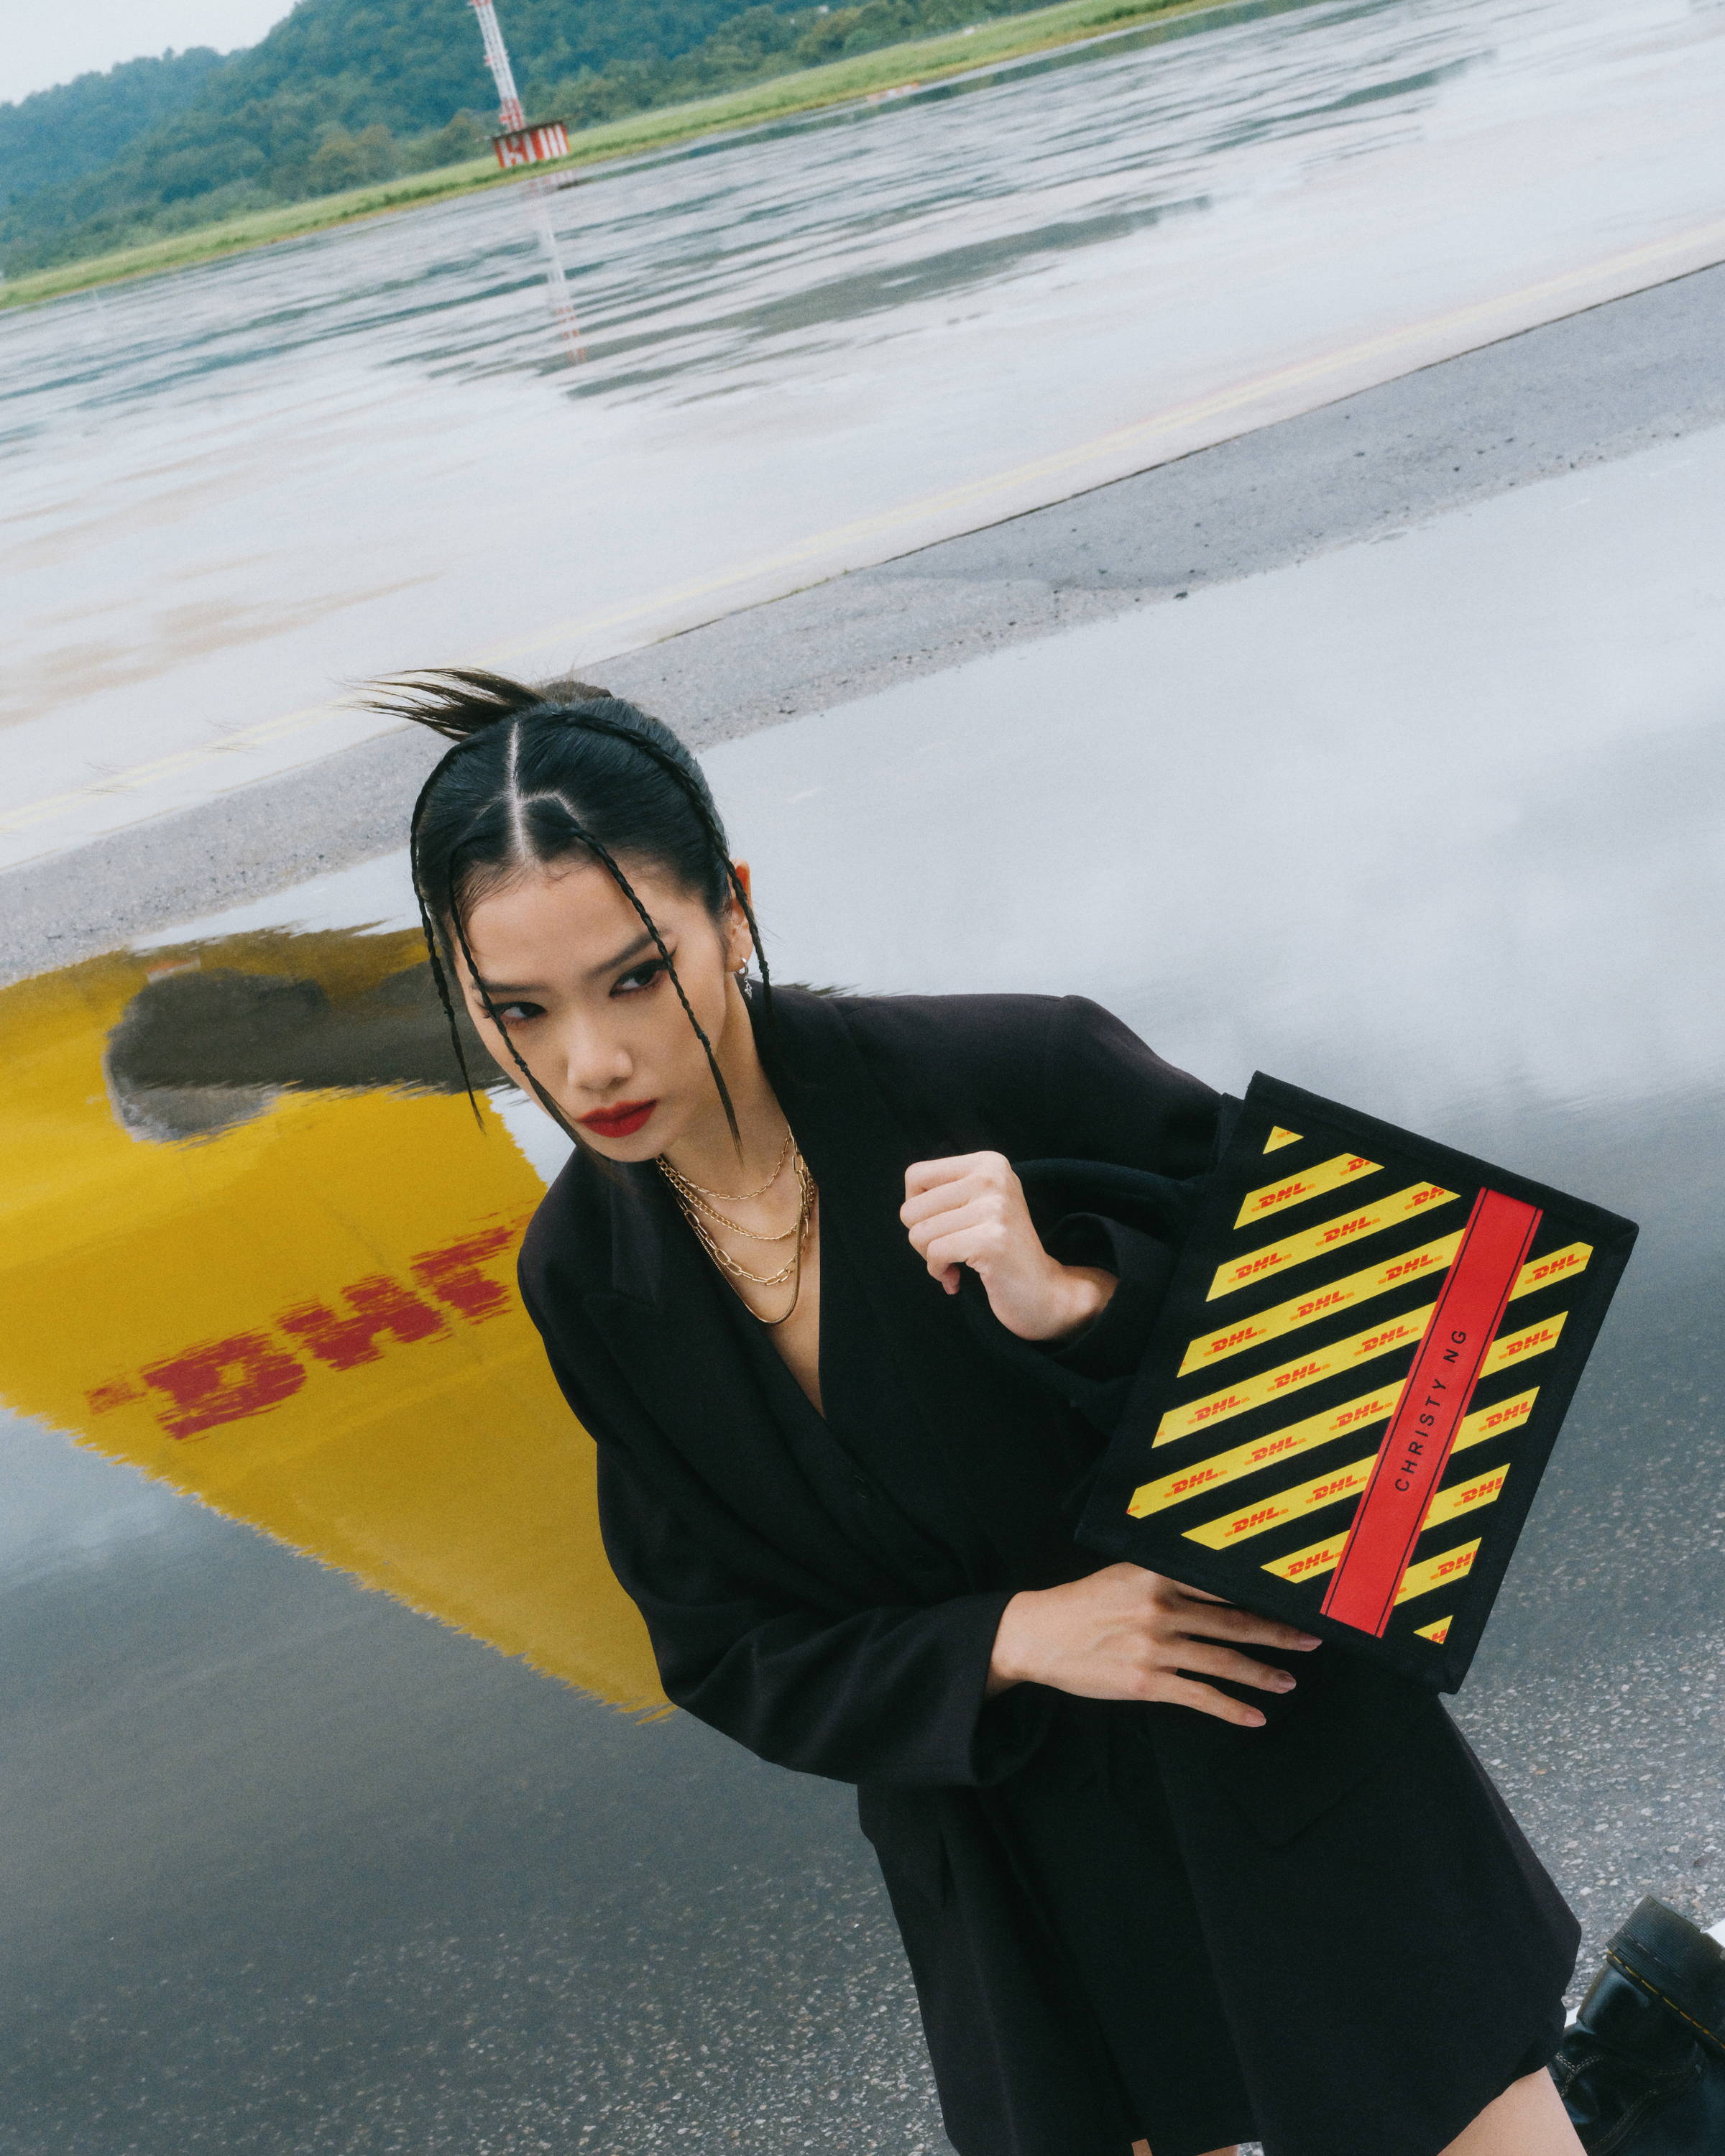 Introducing: DHL x Christy Ng Limited Edition Collection